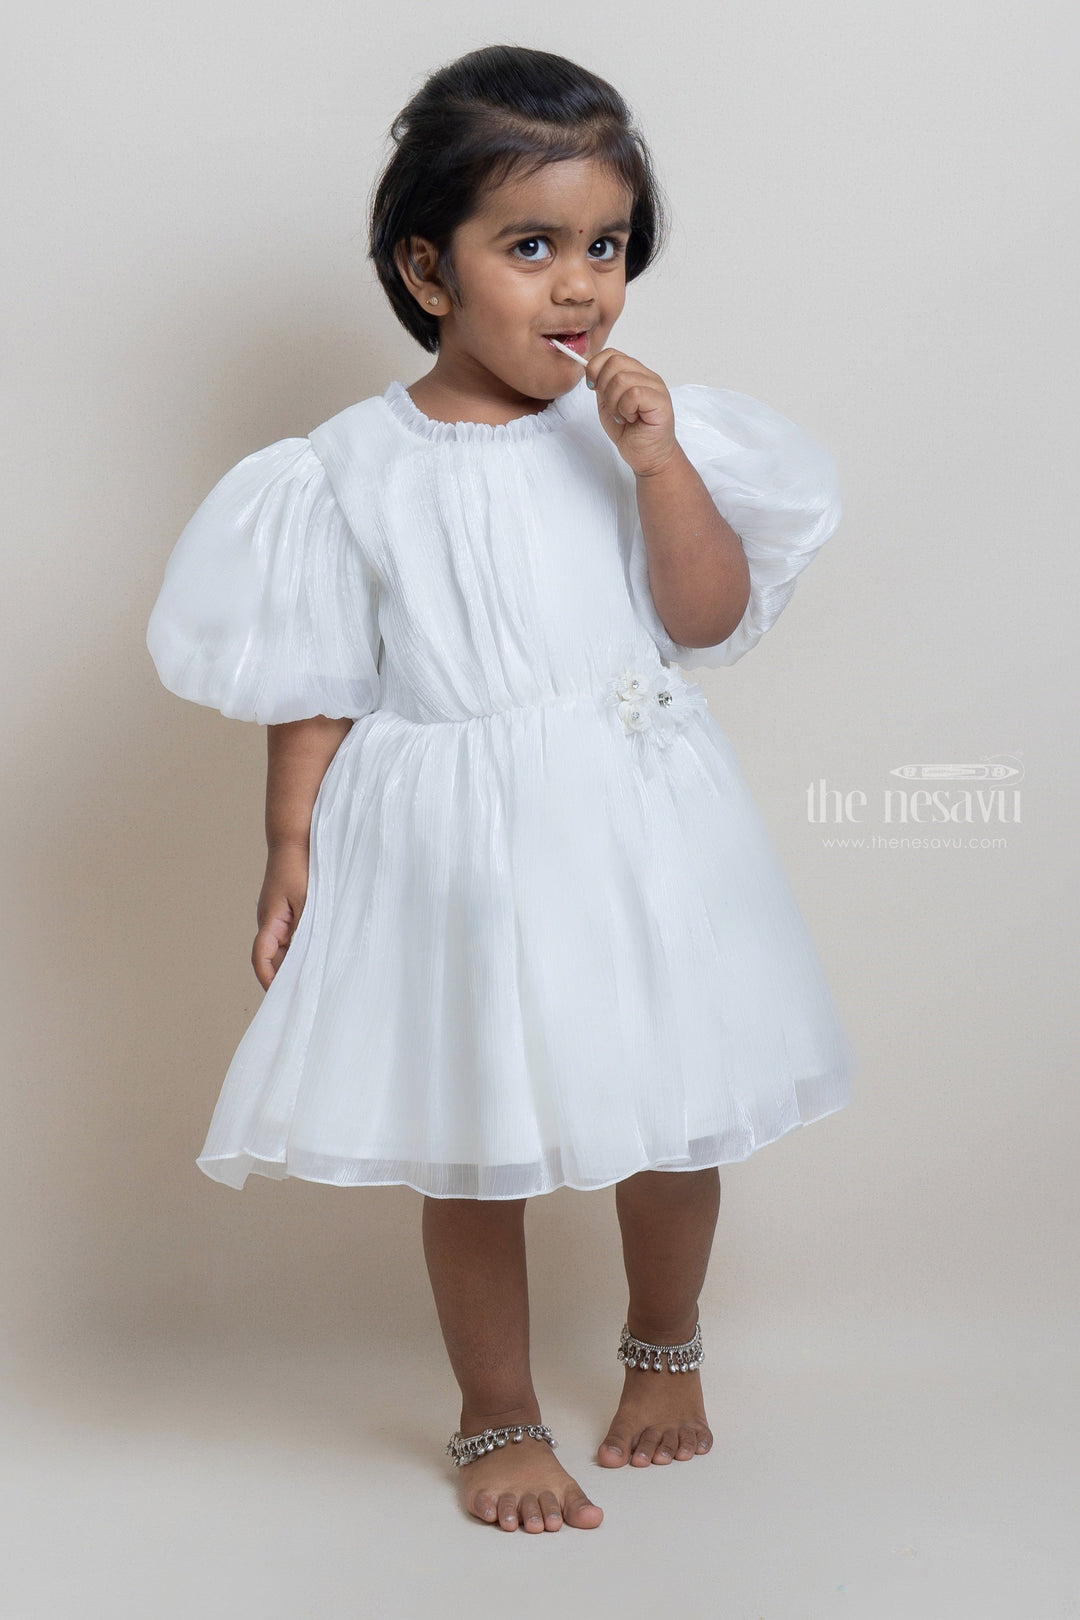 The Nesavu Girls Fancy Party Frock Cutest White Glaze Organza Puffed Sleeve Solid Party Frock For Girls Nesavu 14 (6M) / White PF53E Glamorous party frocks | Elegant party frocks | The Nesavu